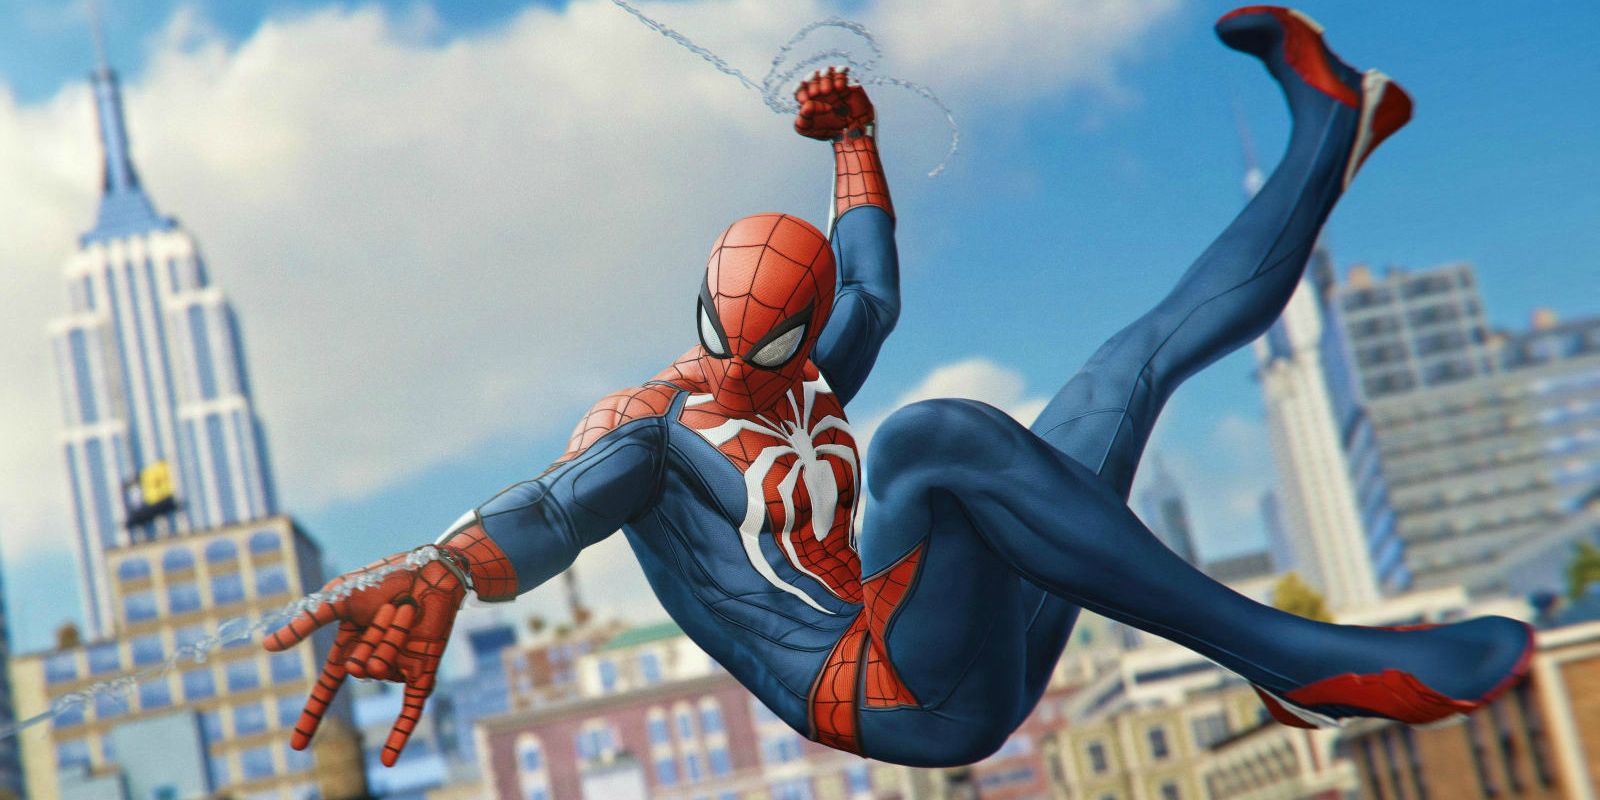 Heres EVERY Unlockable Suit In Marvels SpiderMan PS4 Game